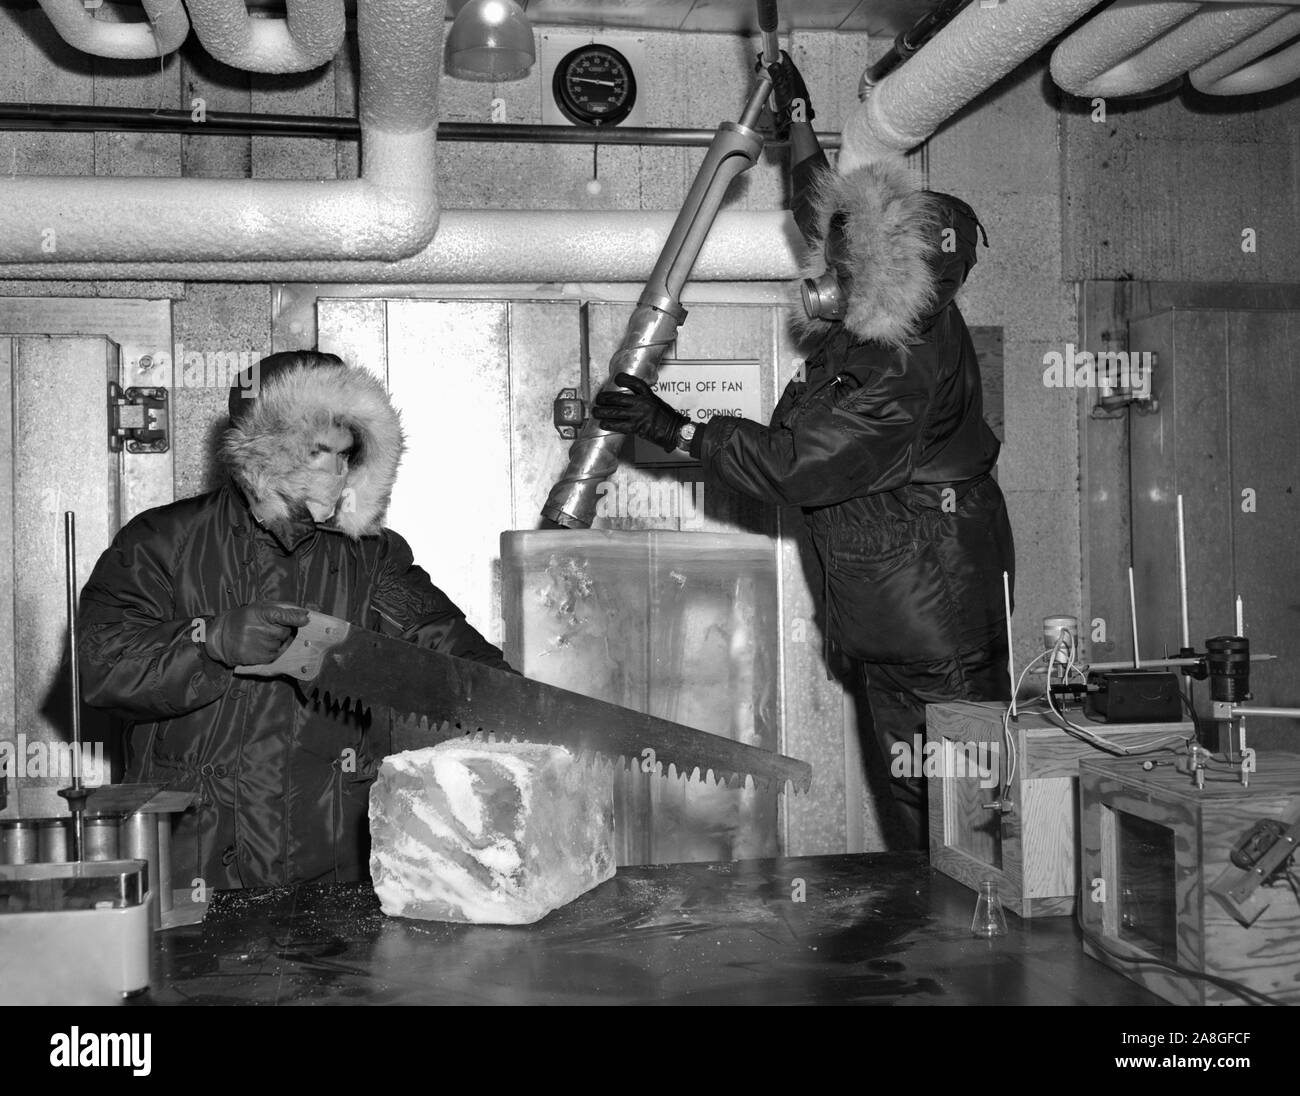 Workers in a research lab in Chicago work with block of ice in an super cold environment, ca. 1955. Stock Photo